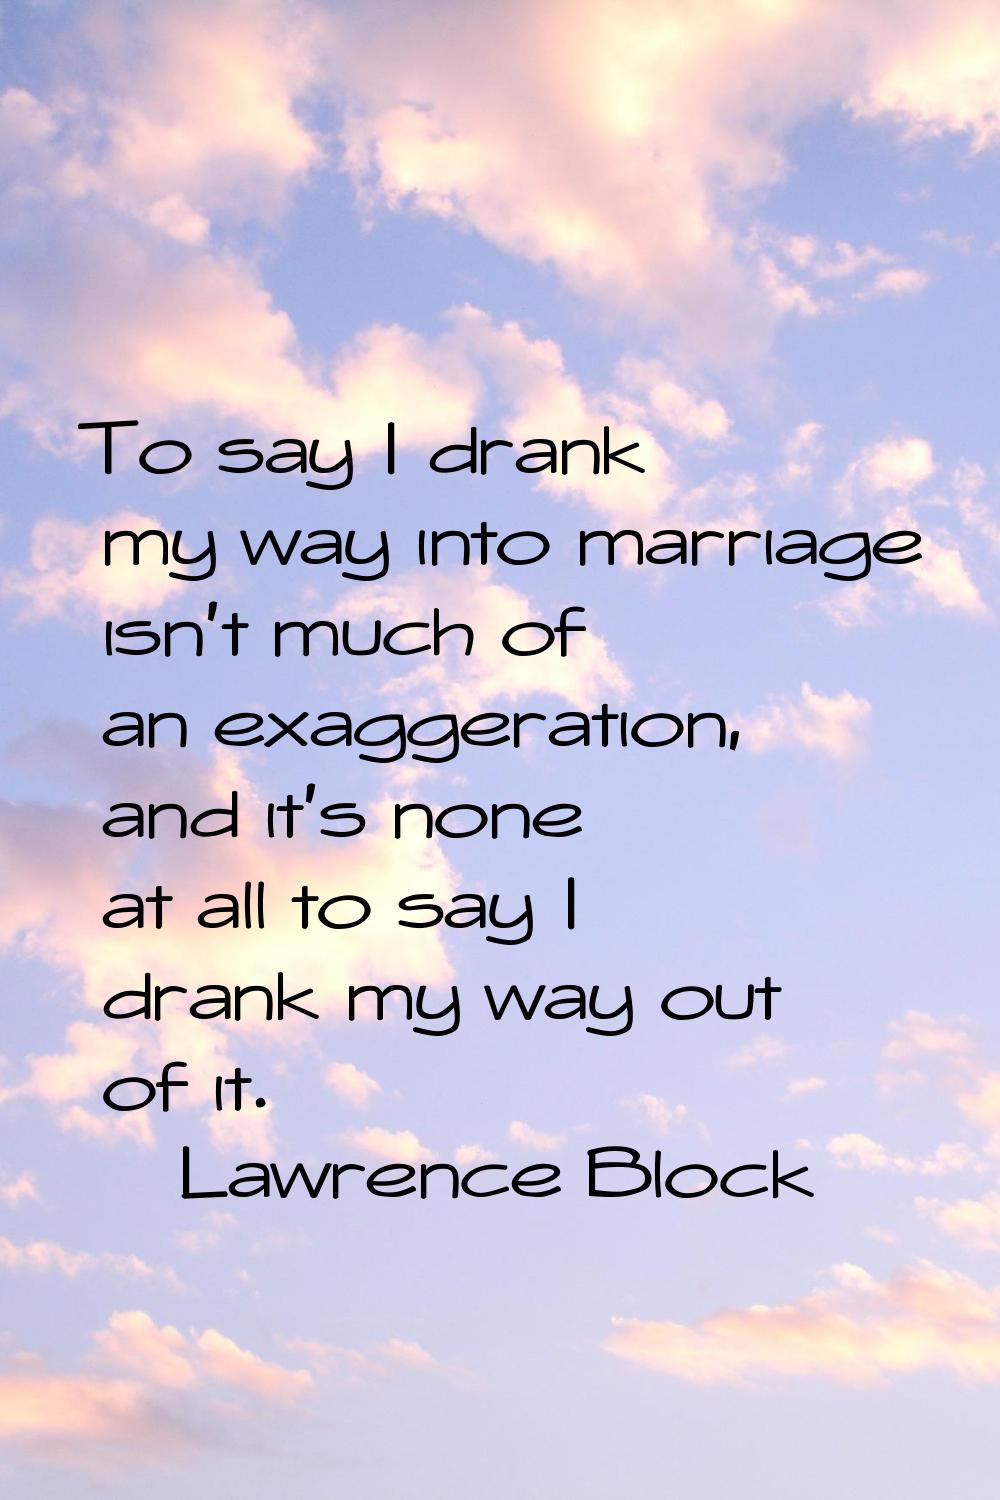 To say I drank my way into marriage isn't much of an exaggeration, and it's none at all to say I dr